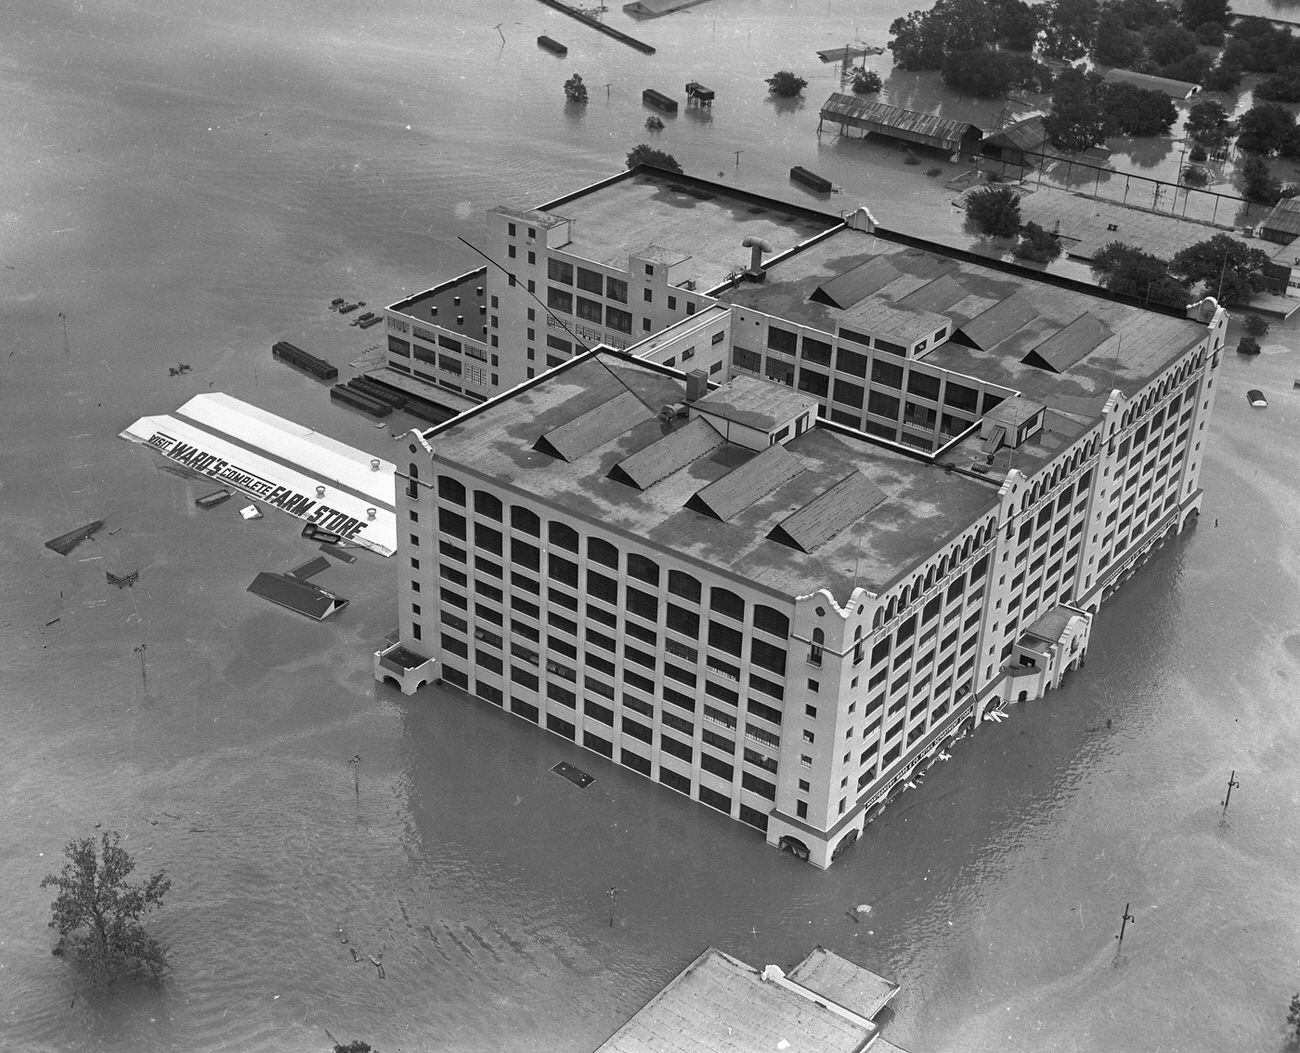 Fort Worth, Texas, flood of 1949, showing 7th Street under water. The large Montgomery Ward building received extensive damage.